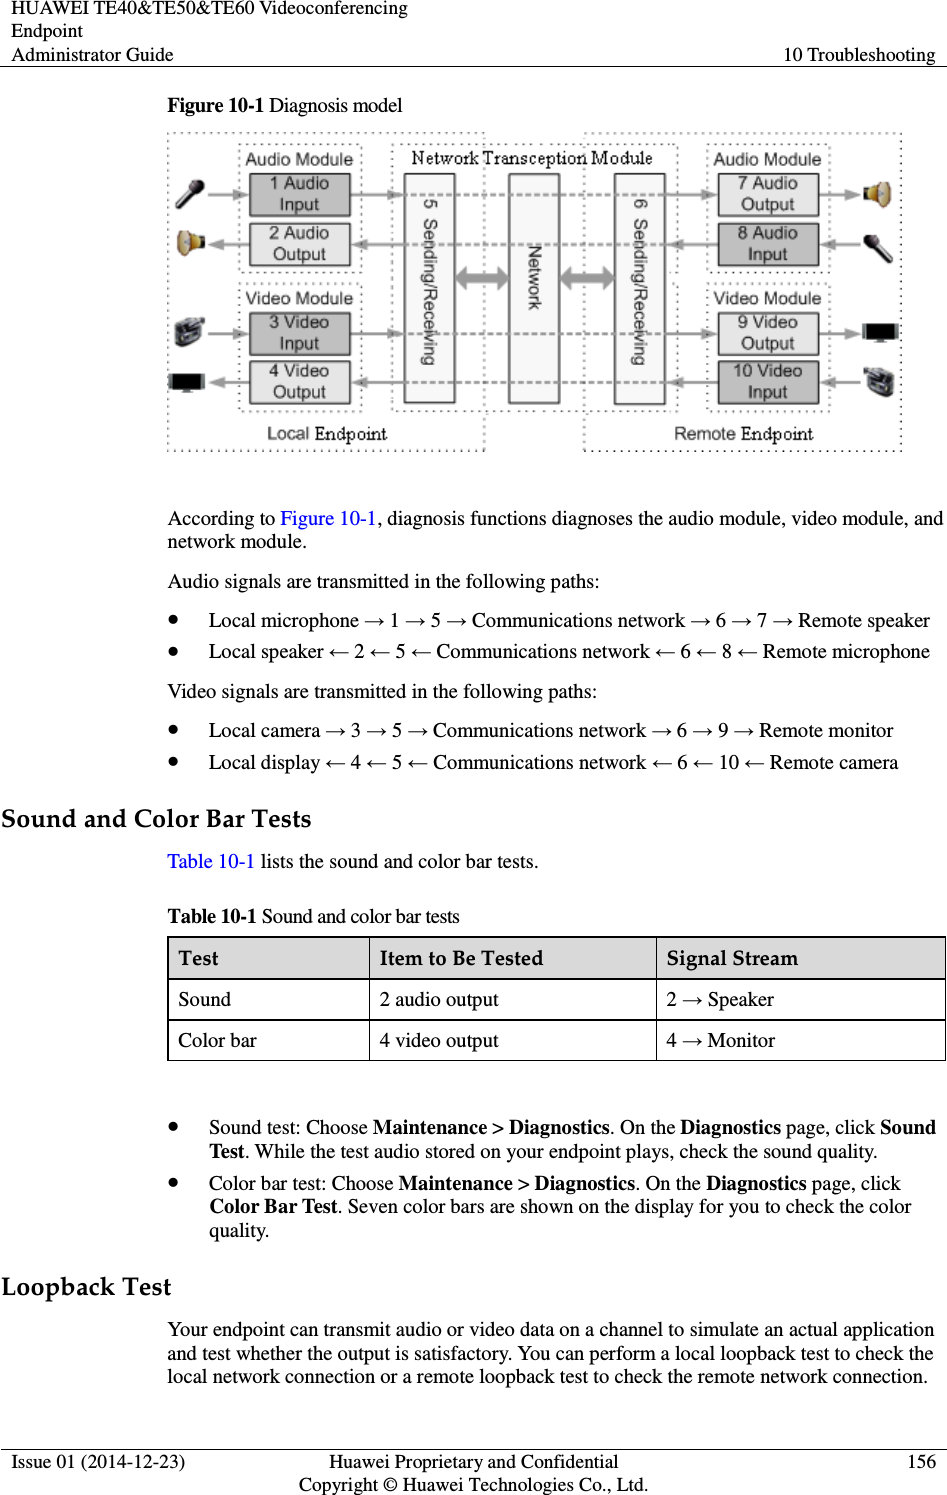 HUAWEI TE40&amp;TE50&amp;TE60 Videoconferencing Endpoint Administrator Guide  10 Troubleshooting  Issue 01 (2014-12-23)  Huawei Proprietary and Confidential                                     Copyright © Huawei Technologies Co., Ltd. 156  Figure 10-1 Diagnosis model   According to Figure 10-1, diagnosis functions diagnoses the audio module, video module, and network module. Audio signals are transmitted in the following paths:  Local microphone → 1 → 5 → Communications network → 6 → 7 → Remote speaker  Local speaker ← 2 ← 5 ← Communications network ← 6 ← 8 ← Remote microphone Video signals are transmitted in the following paths:  Local camera → 3 → 5 → Communications network → 6 → 9 → Remote monitor  Local display ← 4 ← 5 ← Communications network ← 6 ← 10 ← Remote camera Sound and Color Bar Tests Table 10-1 lists the sound and color bar tests. Table 10-1 Sound and color bar tests Test  Item to Be Tested  Signal Stream Sound  2 audio output  2 → Speaker Color bar  4 video output  4 → Monitor   Sound test: Choose Maintenance &gt; Diagnostics. On the Diagnostics page, click Sound Test. While the test audio stored on your endpoint plays, check the sound quality.  Color bar test: Choose Maintenance &gt; Diagnostics. On the Diagnostics page, click Color Bar Test. Seven color bars are shown on the display for you to check the color quality. Loopback Test Your endpoint can transmit audio or video data on a channel to simulate an actual application and test whether the output is satisfactory. You can perform a local loopback test to check the local network connection or a remote loopback test to check the remote network connection. 